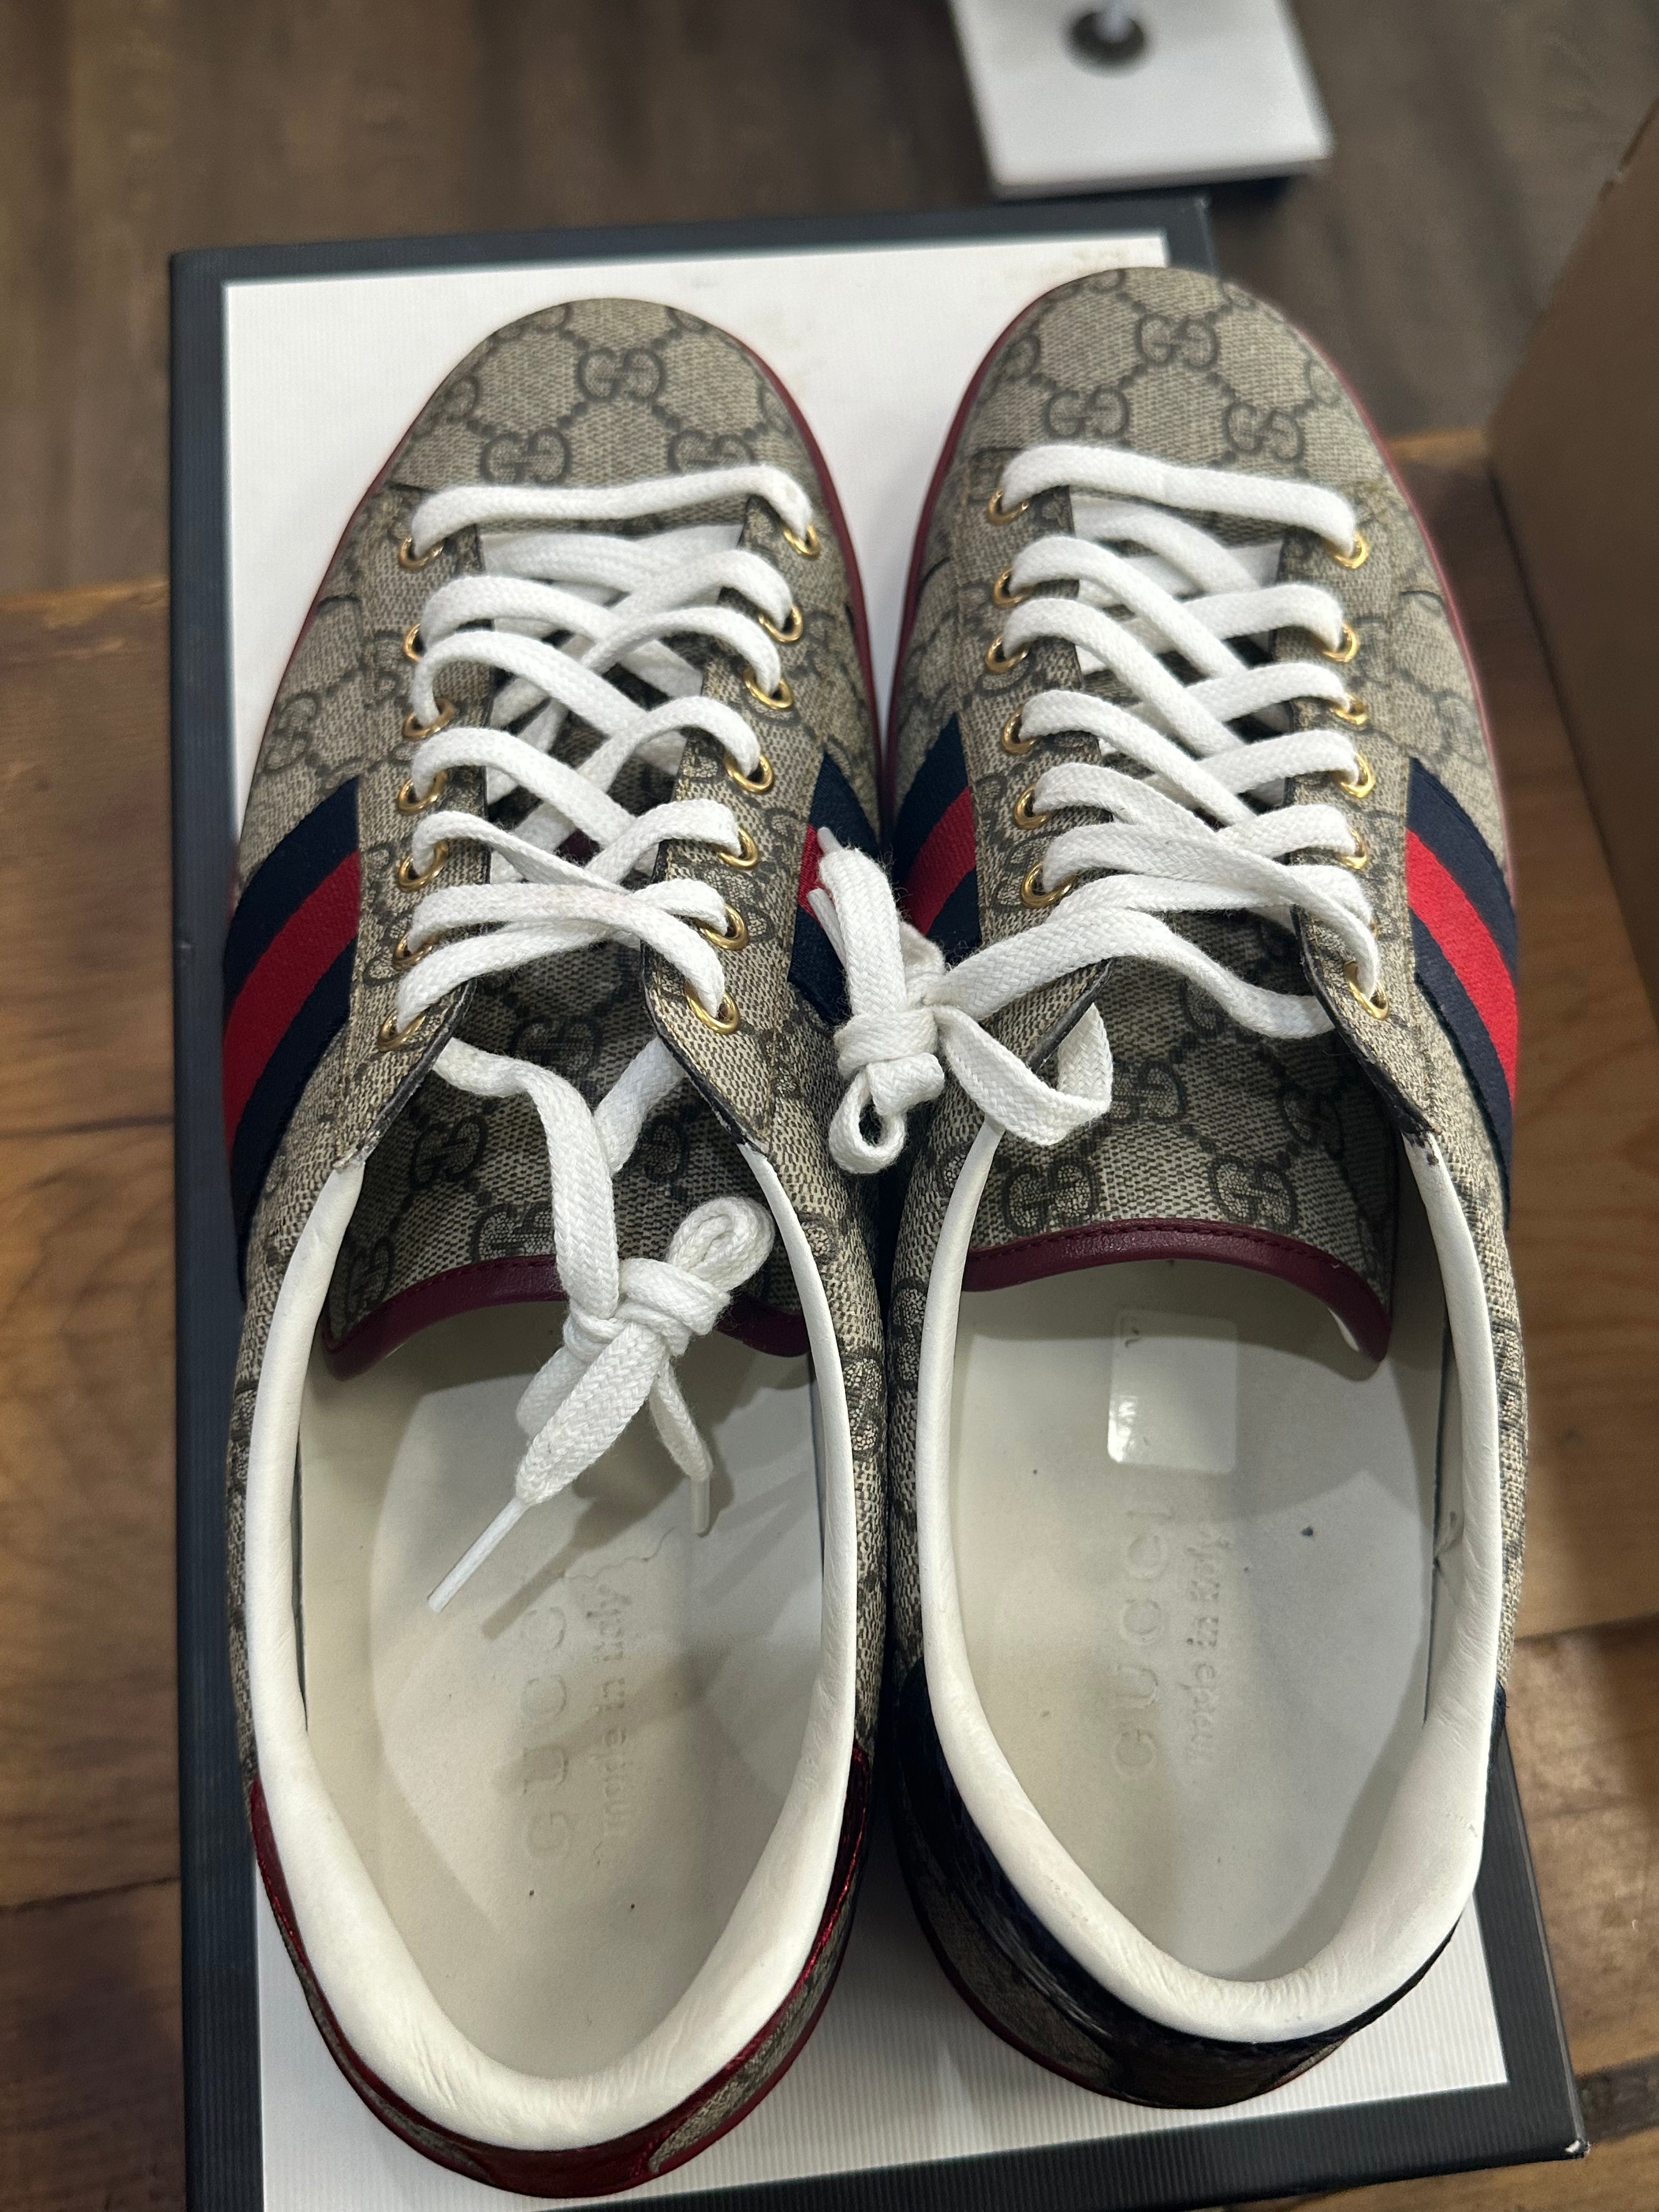 Gucci Ace GG “Beige” - Size 10